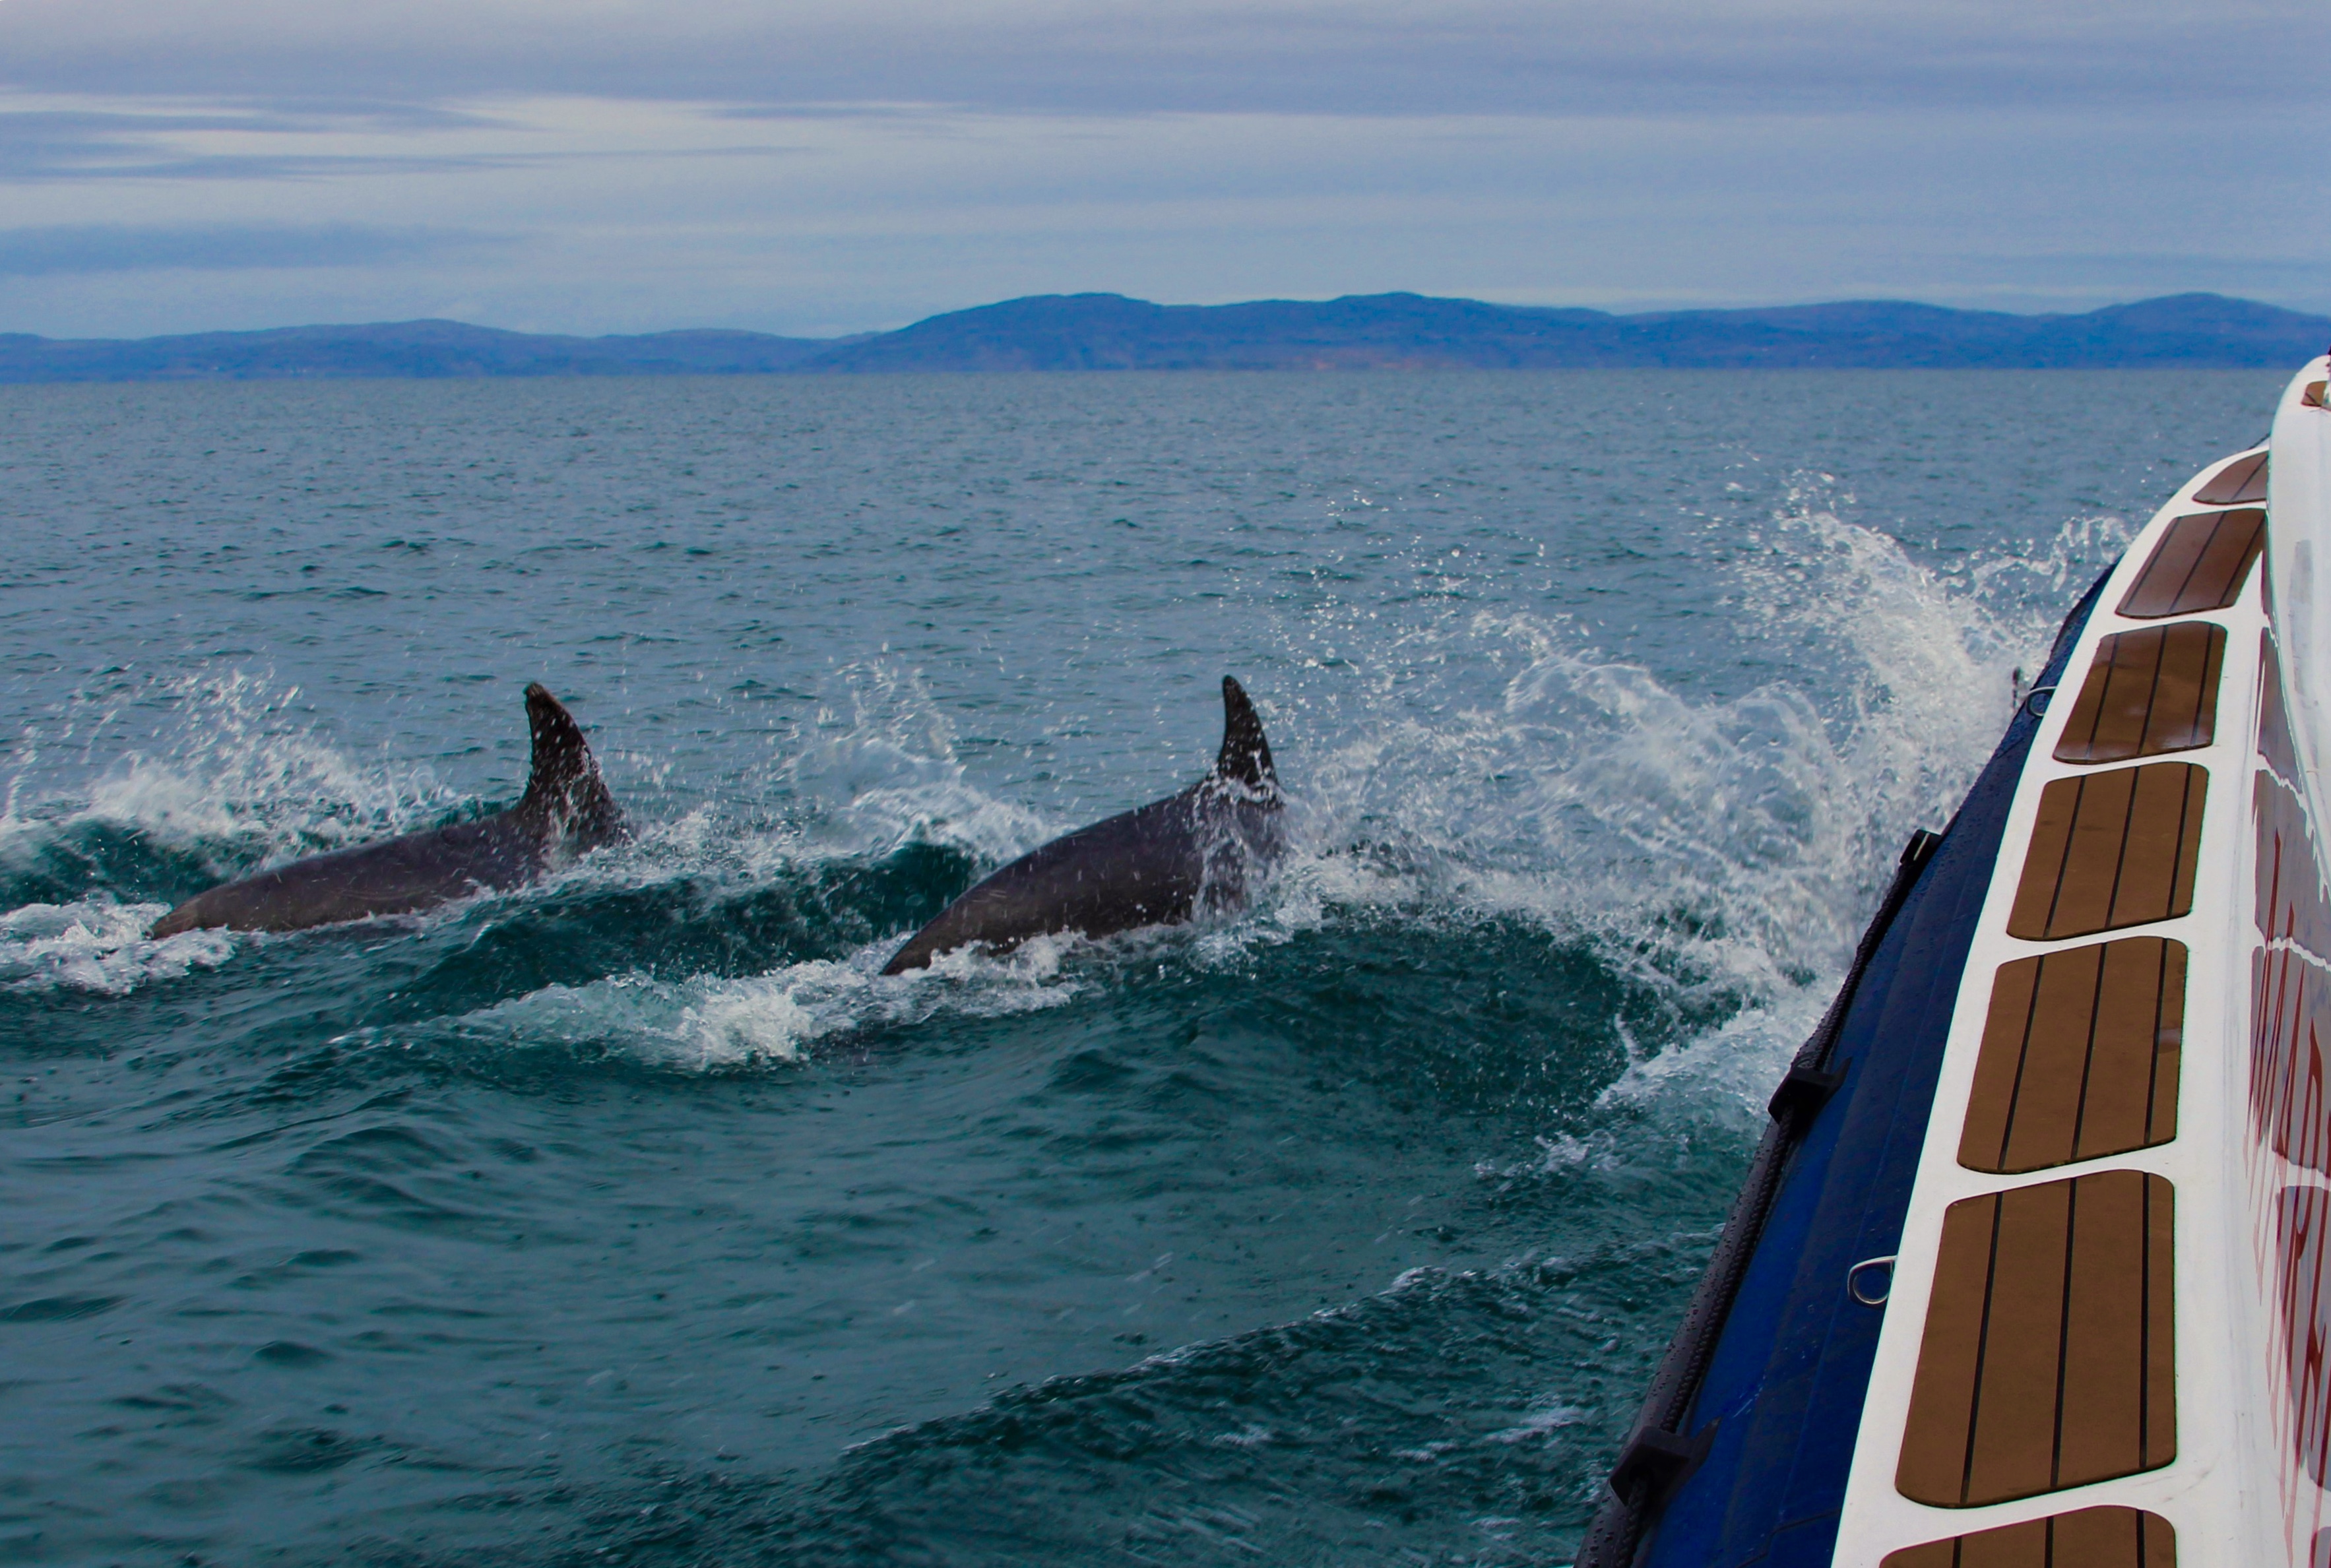 Dolphins off Iona